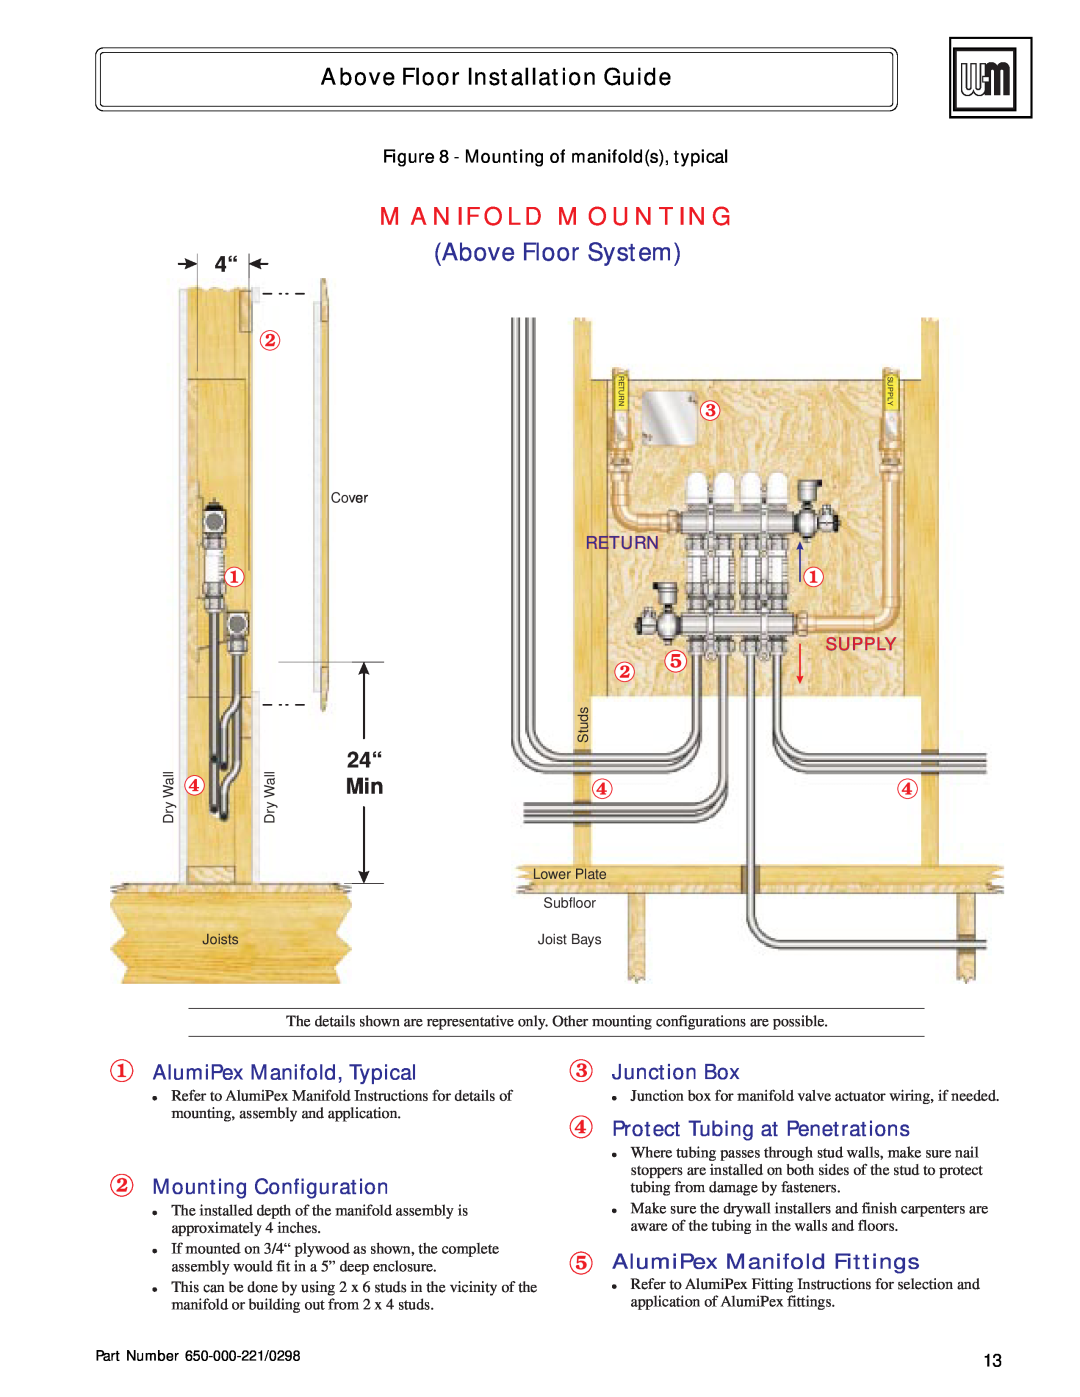 Weil-McLain Radiant Heater Manifold Mounting, AlumiPex Manifold, Typical, Mounting Configuration, Junction Box, Return 